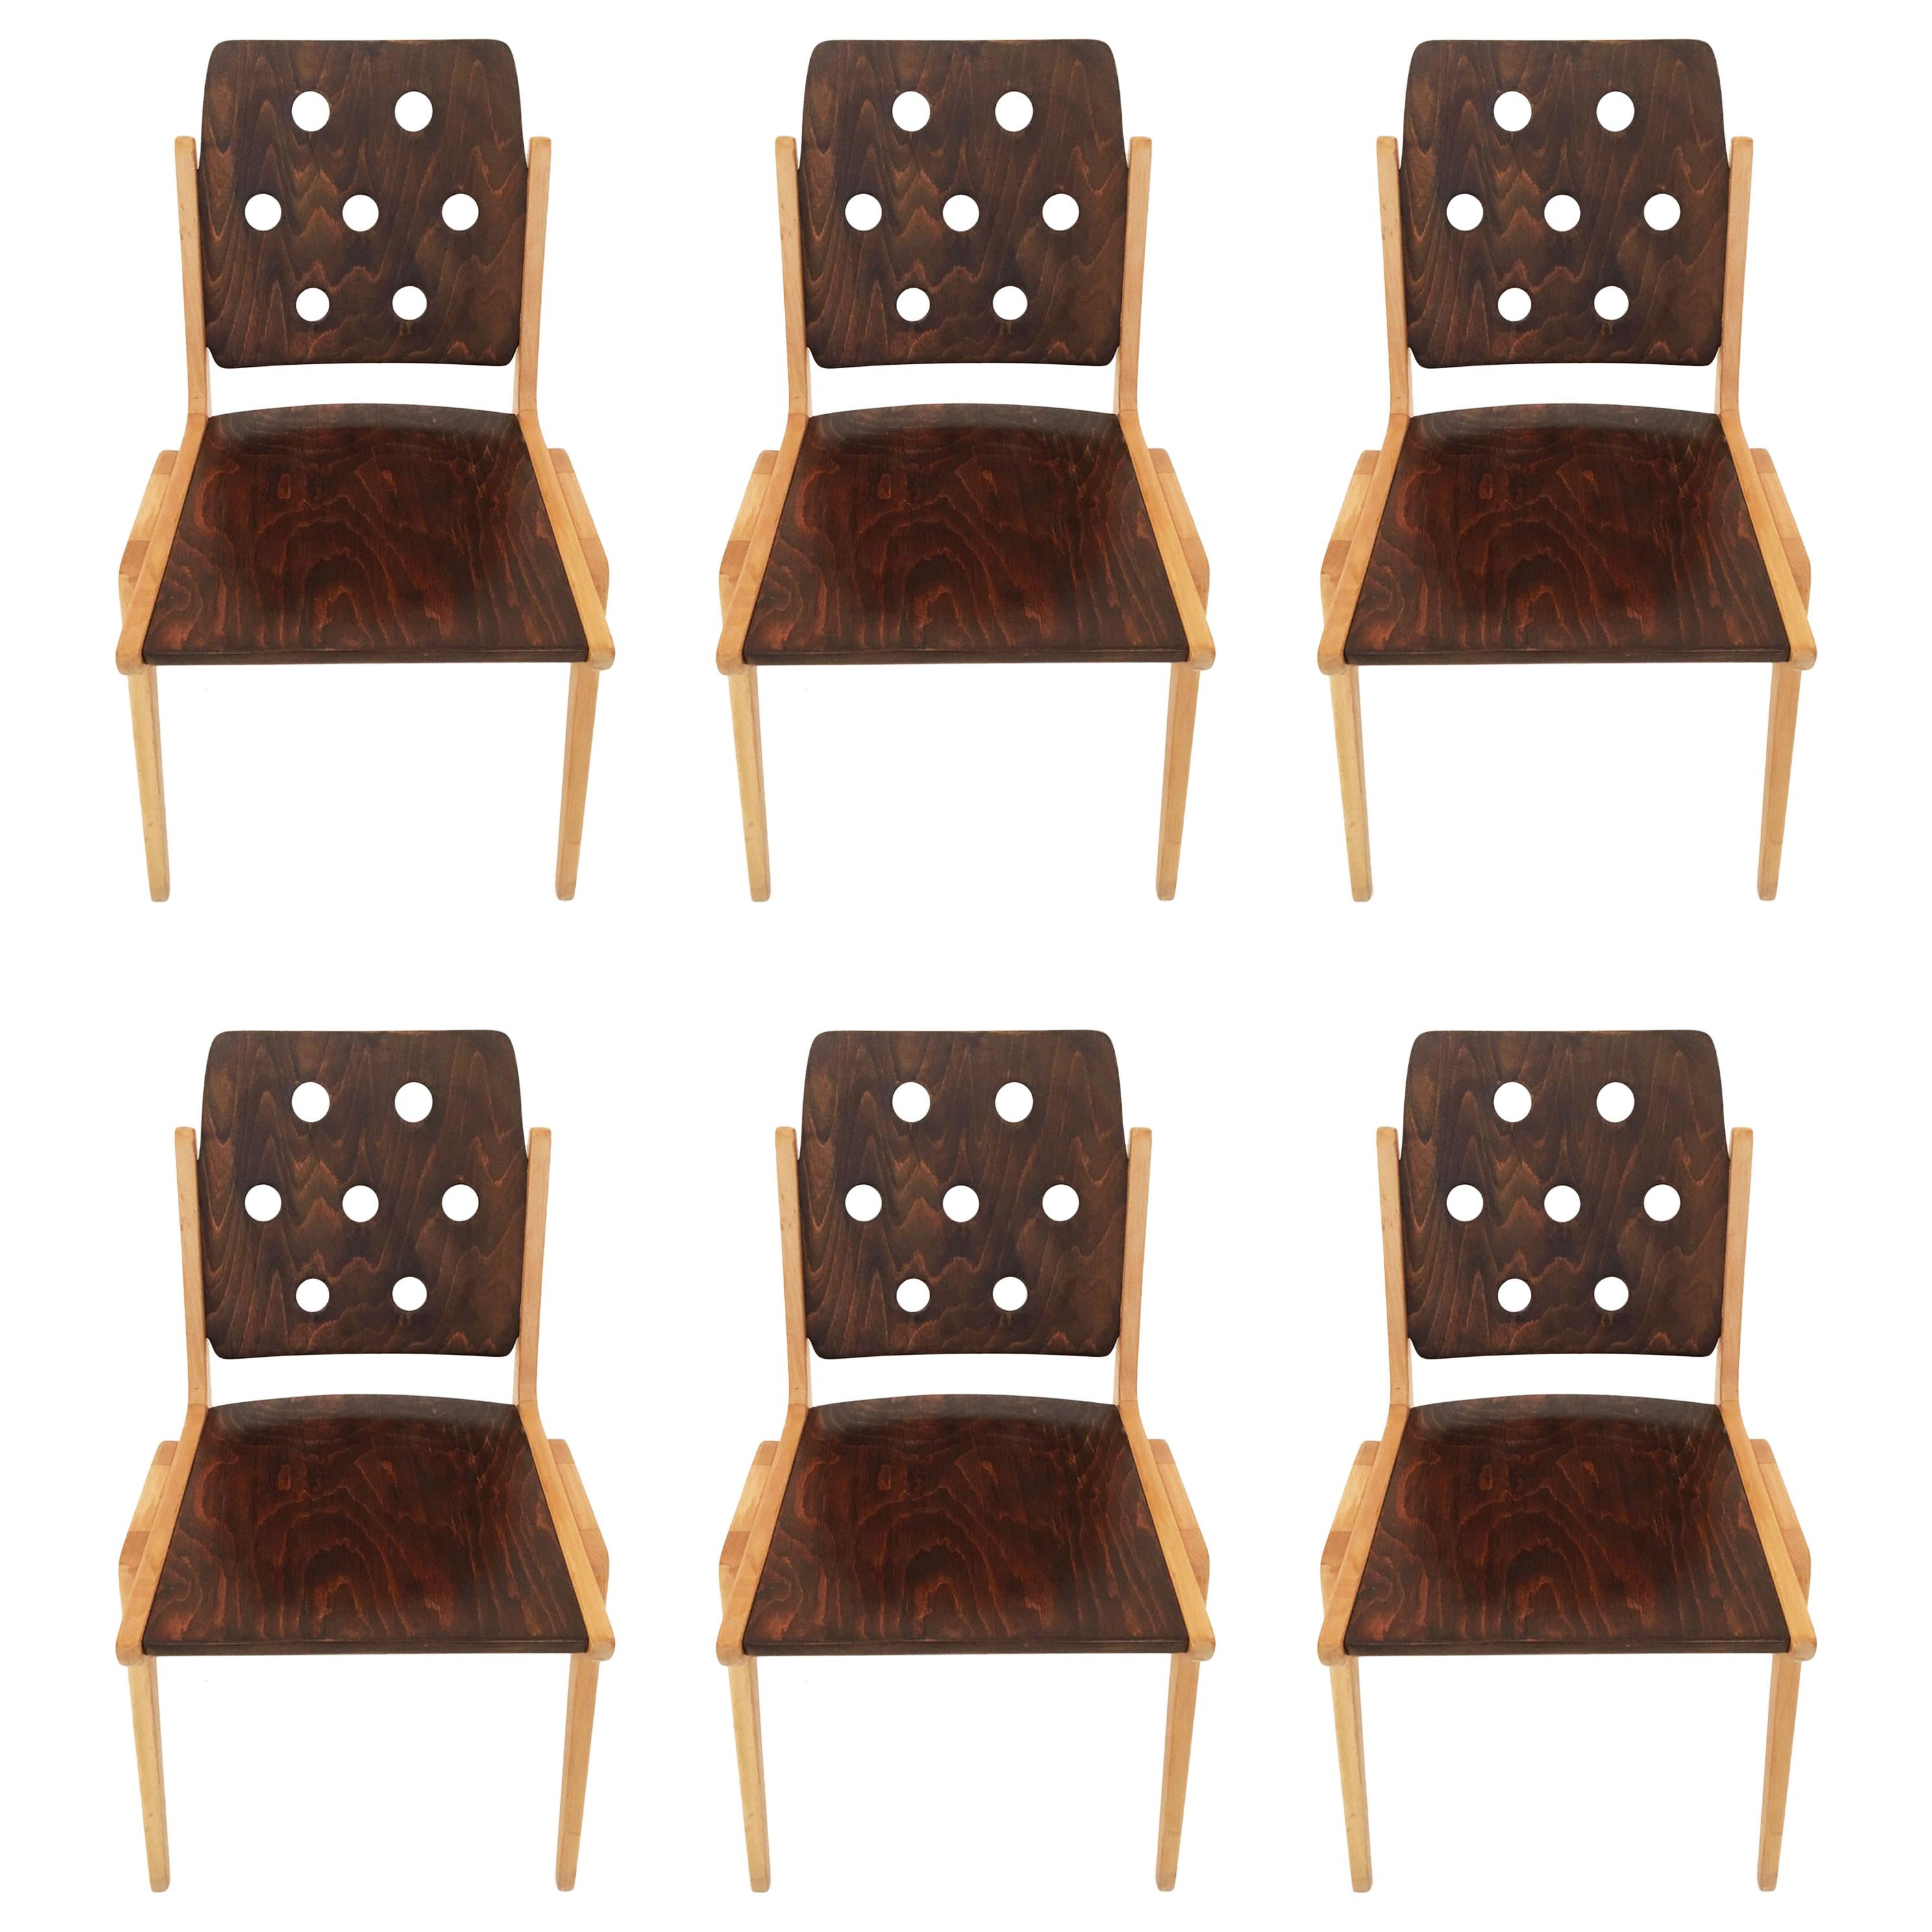 Franz Schuster Stacking Chairs Model 'Maestro', Set of Six, Austria 1950s